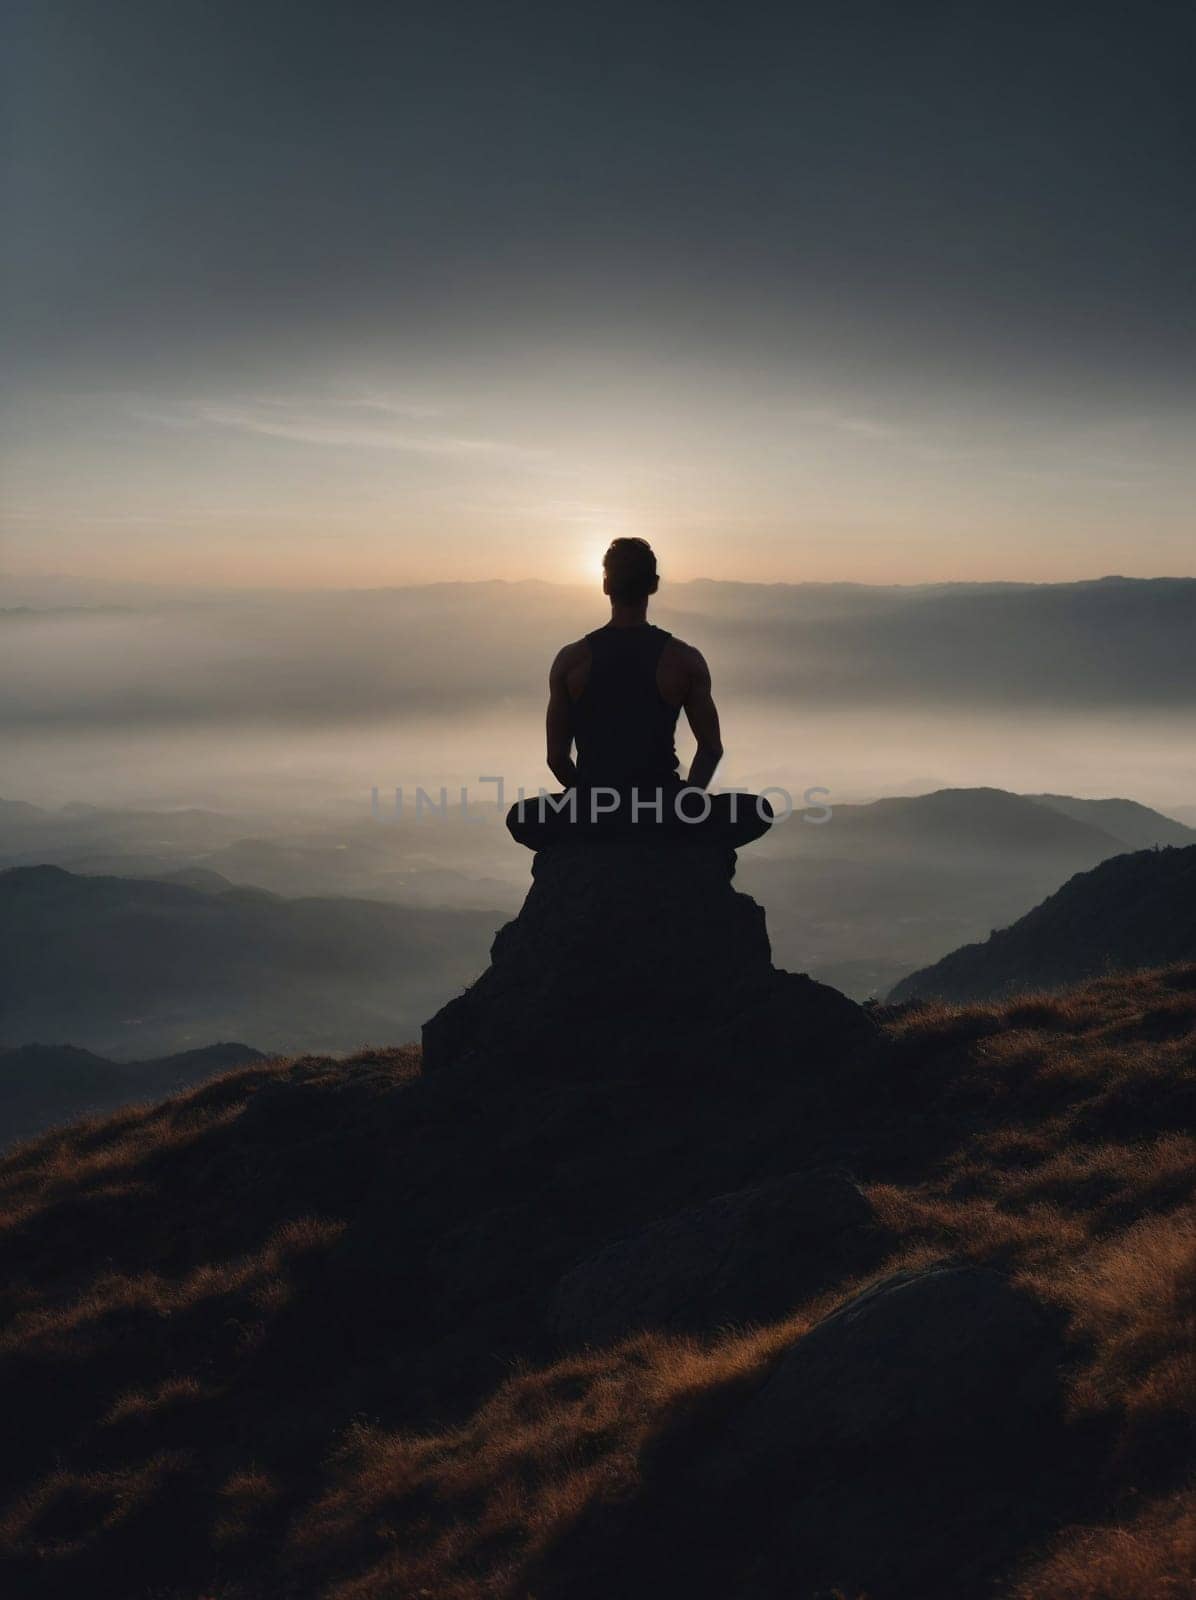 A man sits on top of a mountain, taking in the breathtaking view of a sunset.